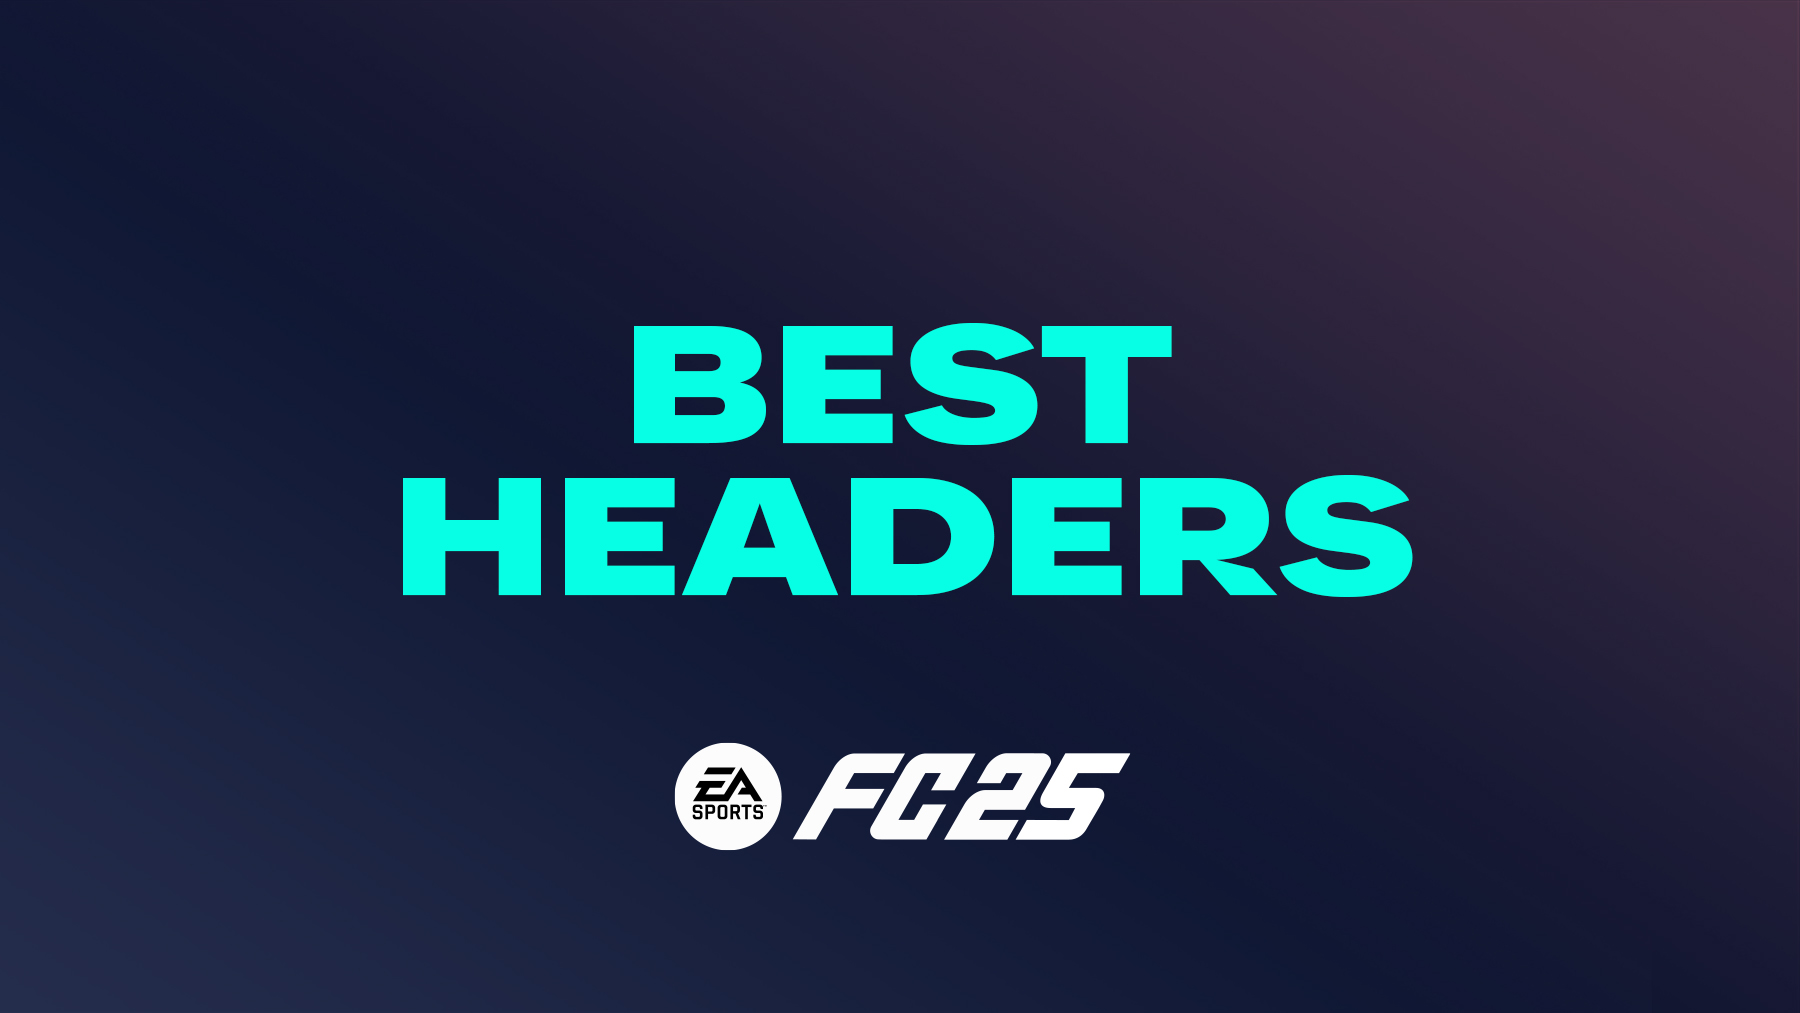 FC 25 Best Headers (Top Heading Players)